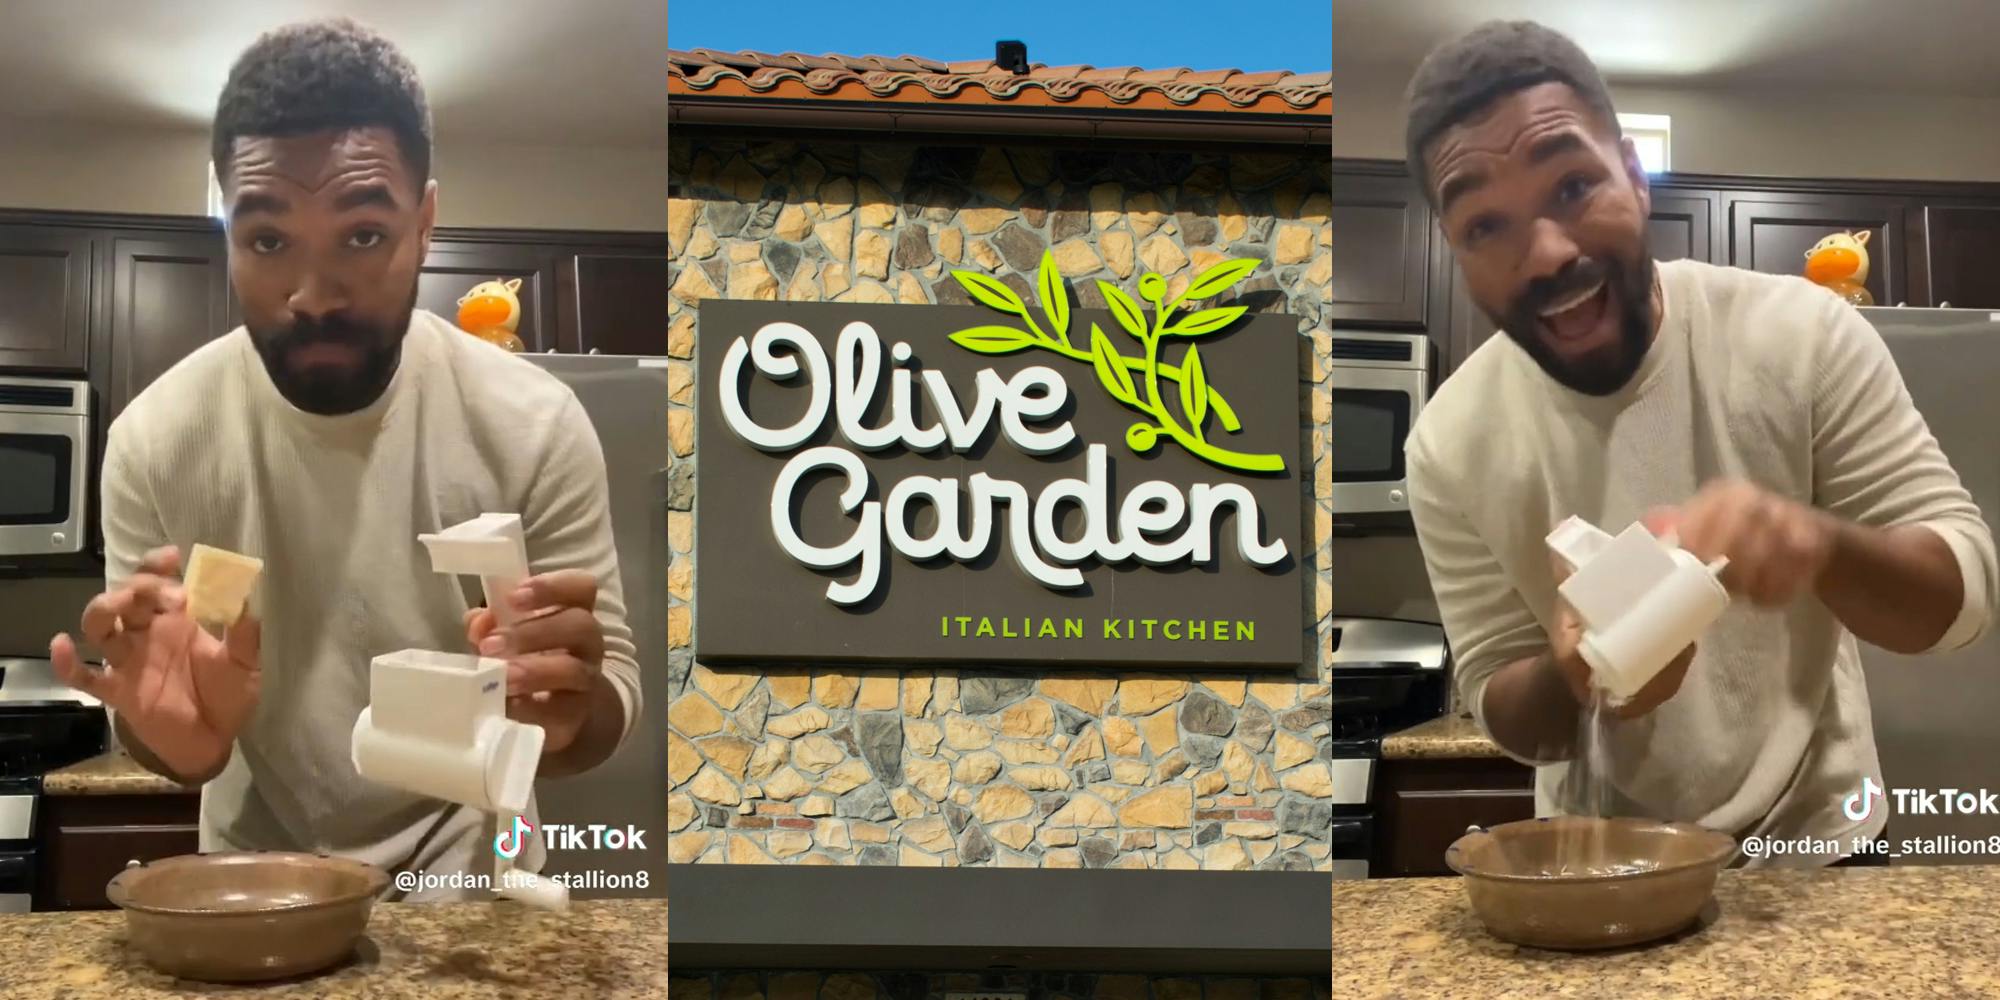 Customer Buys Olive Garden Cheese Grater, Gets A Little Extra